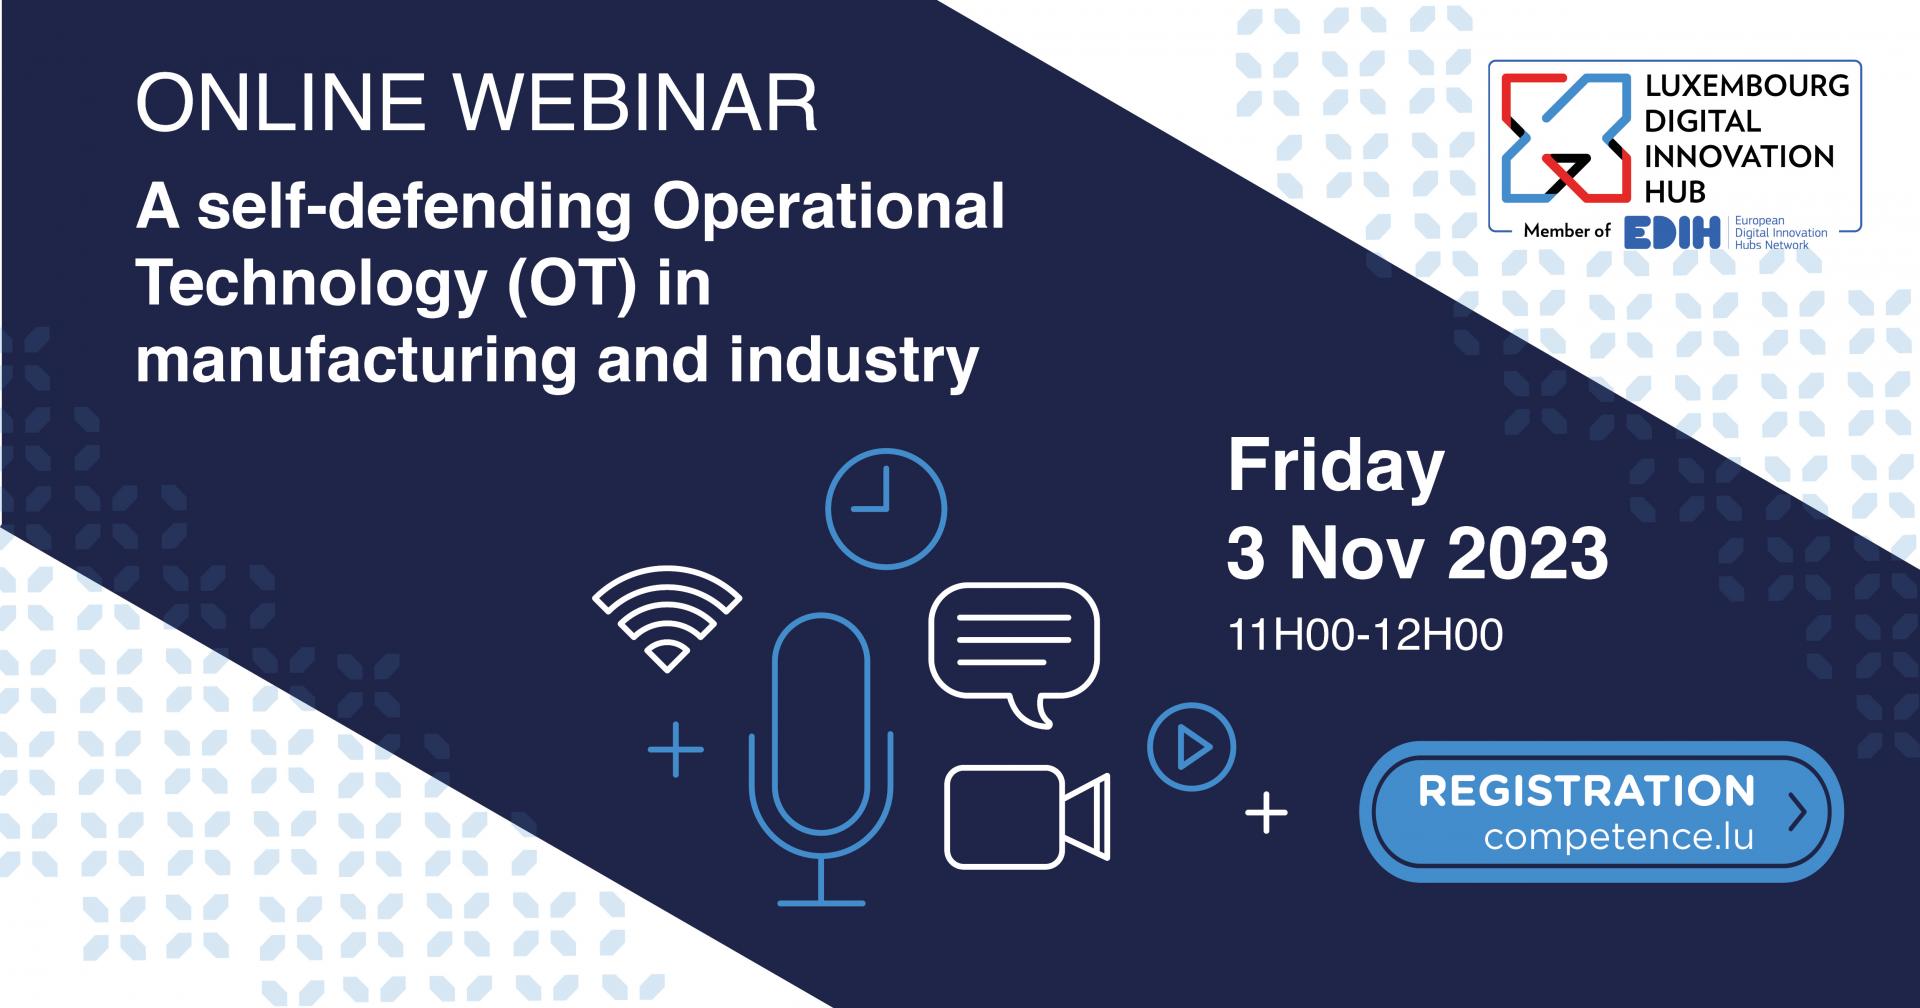 L-DIH WEBINAR: A self-defending Operational Technology (OT) in manufacturing and industry